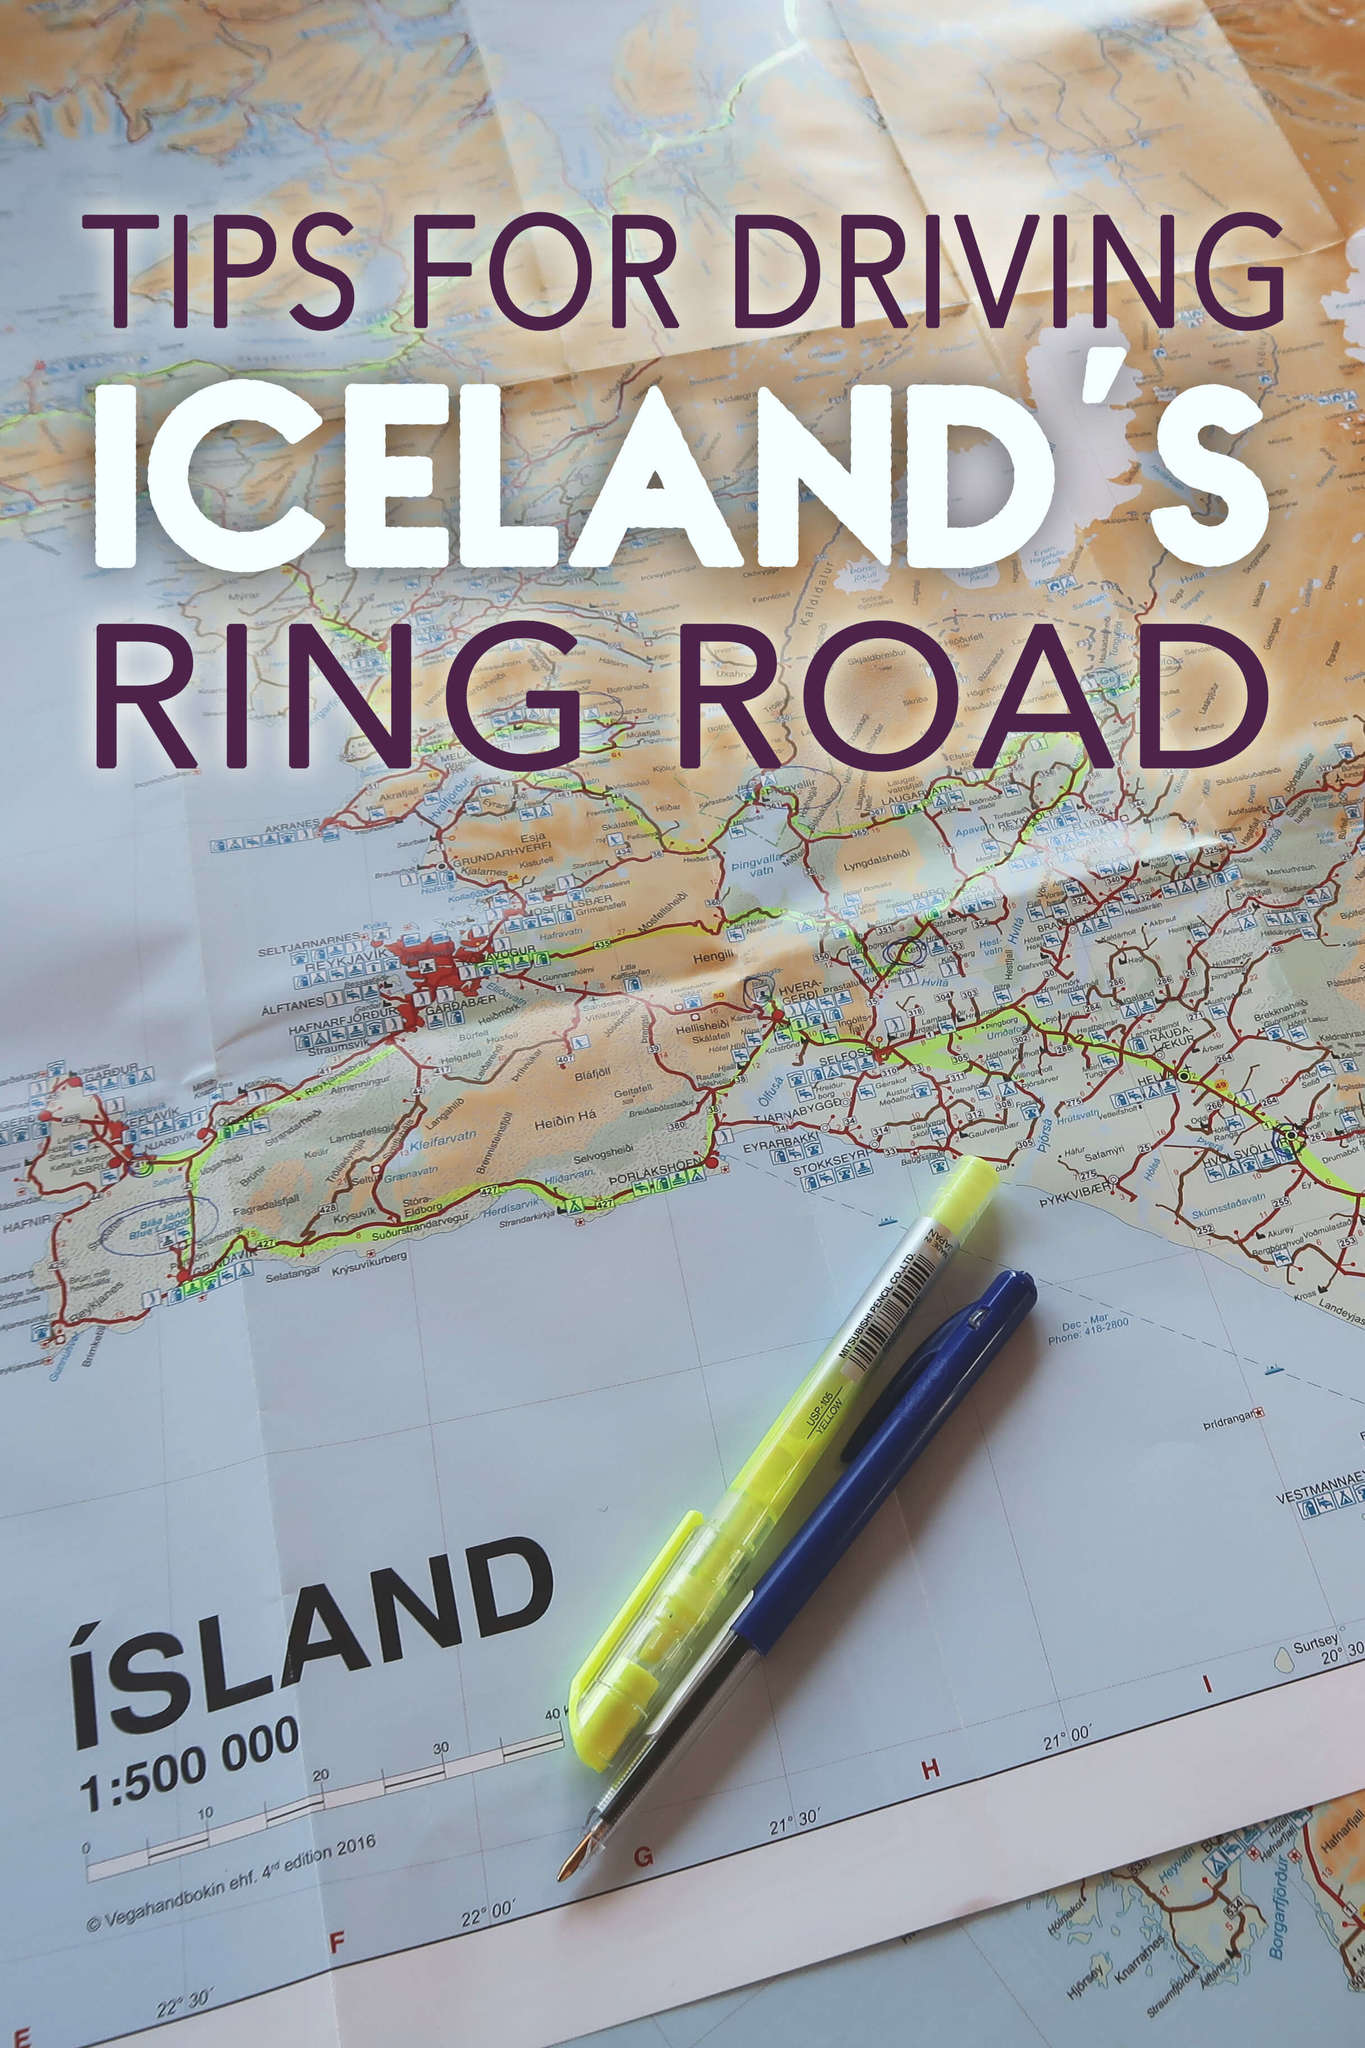 Tips for Driving Iceland's Ring Road